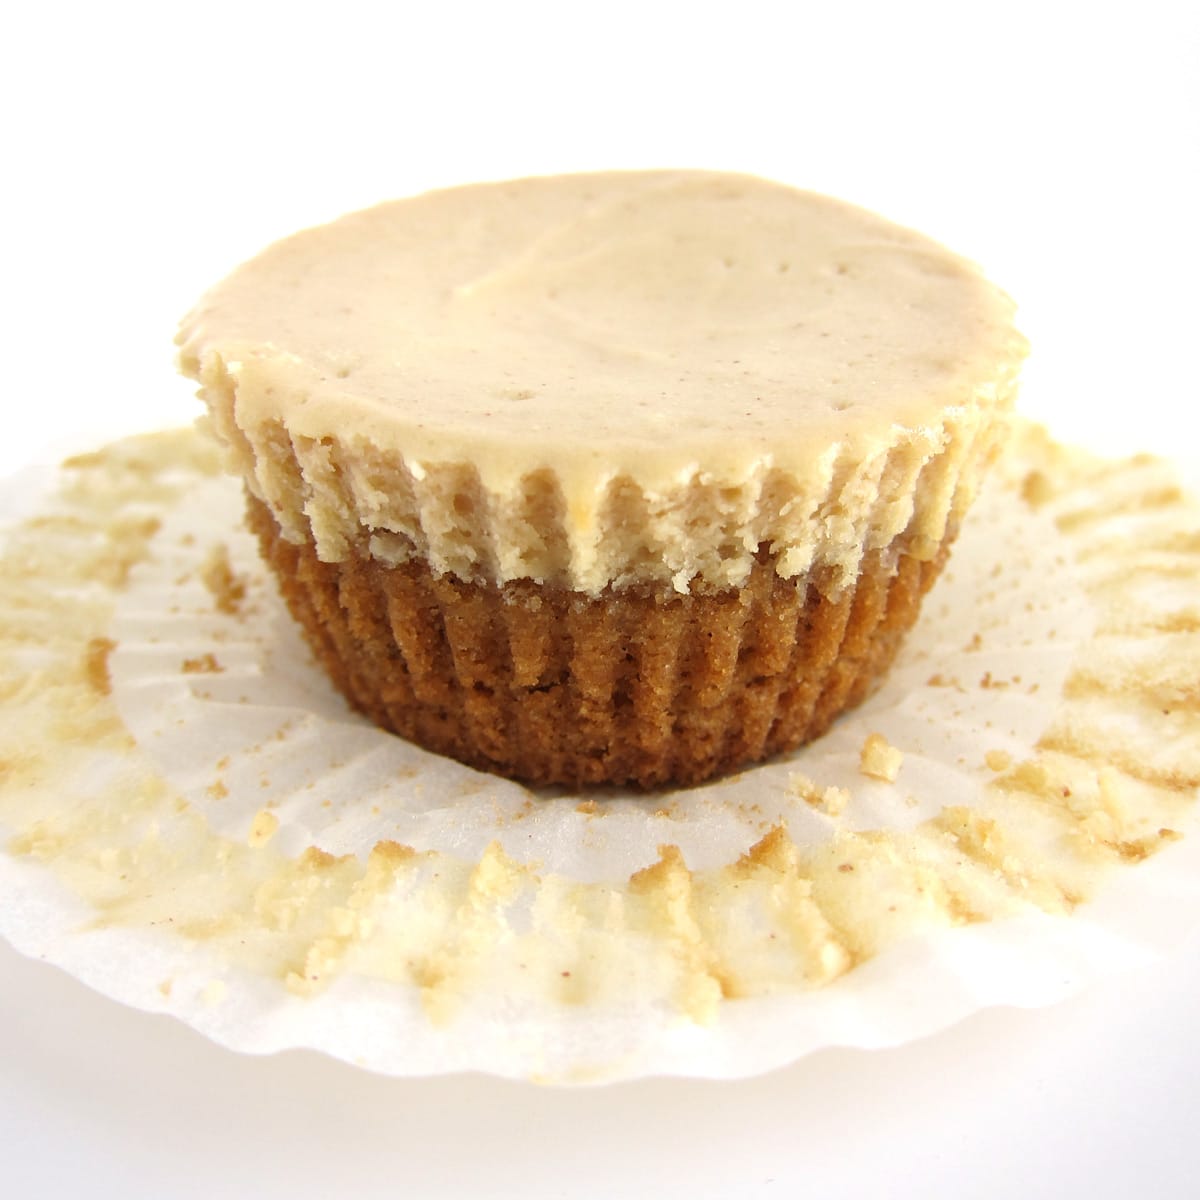 Mini peanut butter cheesecake with paper cupcake wrapper removed.